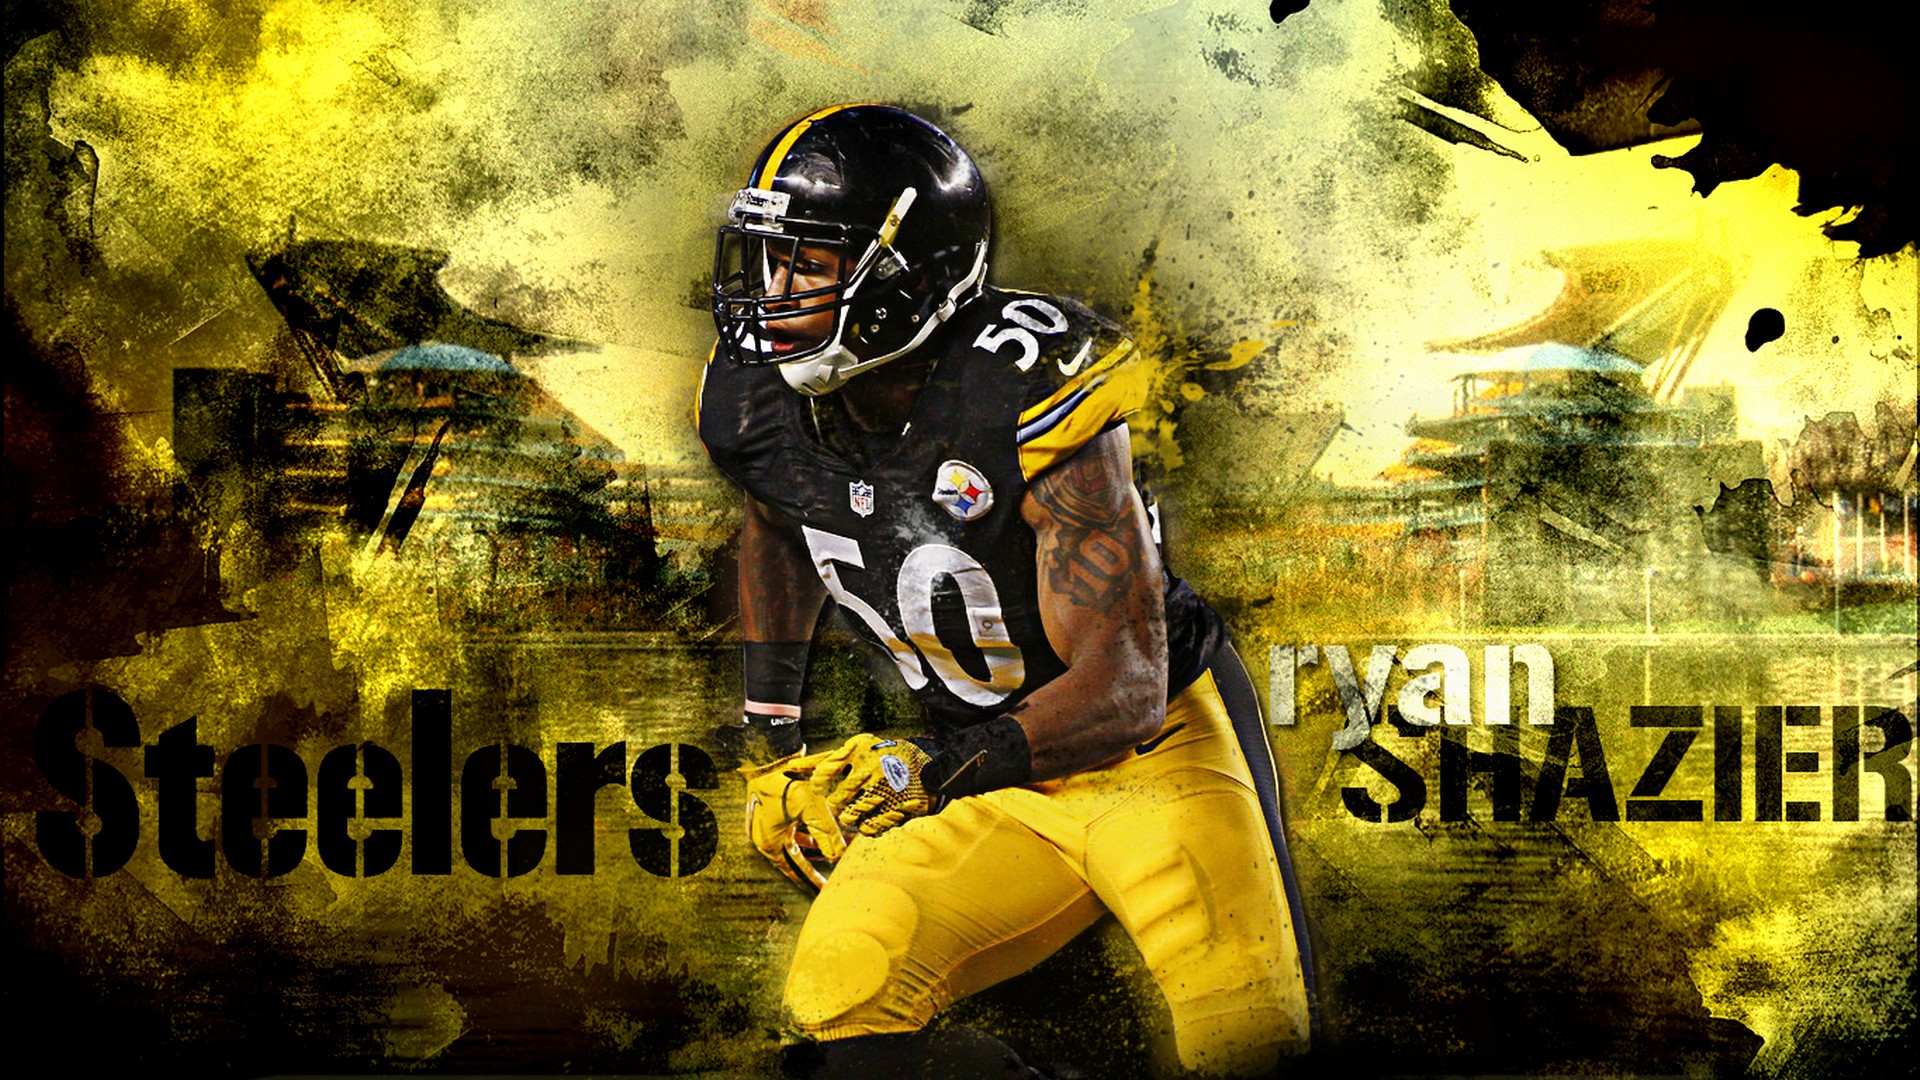 HD Desktop Wallpaper Steelers with resolution 1920x1080 pixel. You can make this wallpaper for your Mac or Windows Desktop Background, iPhone, Android or Tablet and another Smartphone device